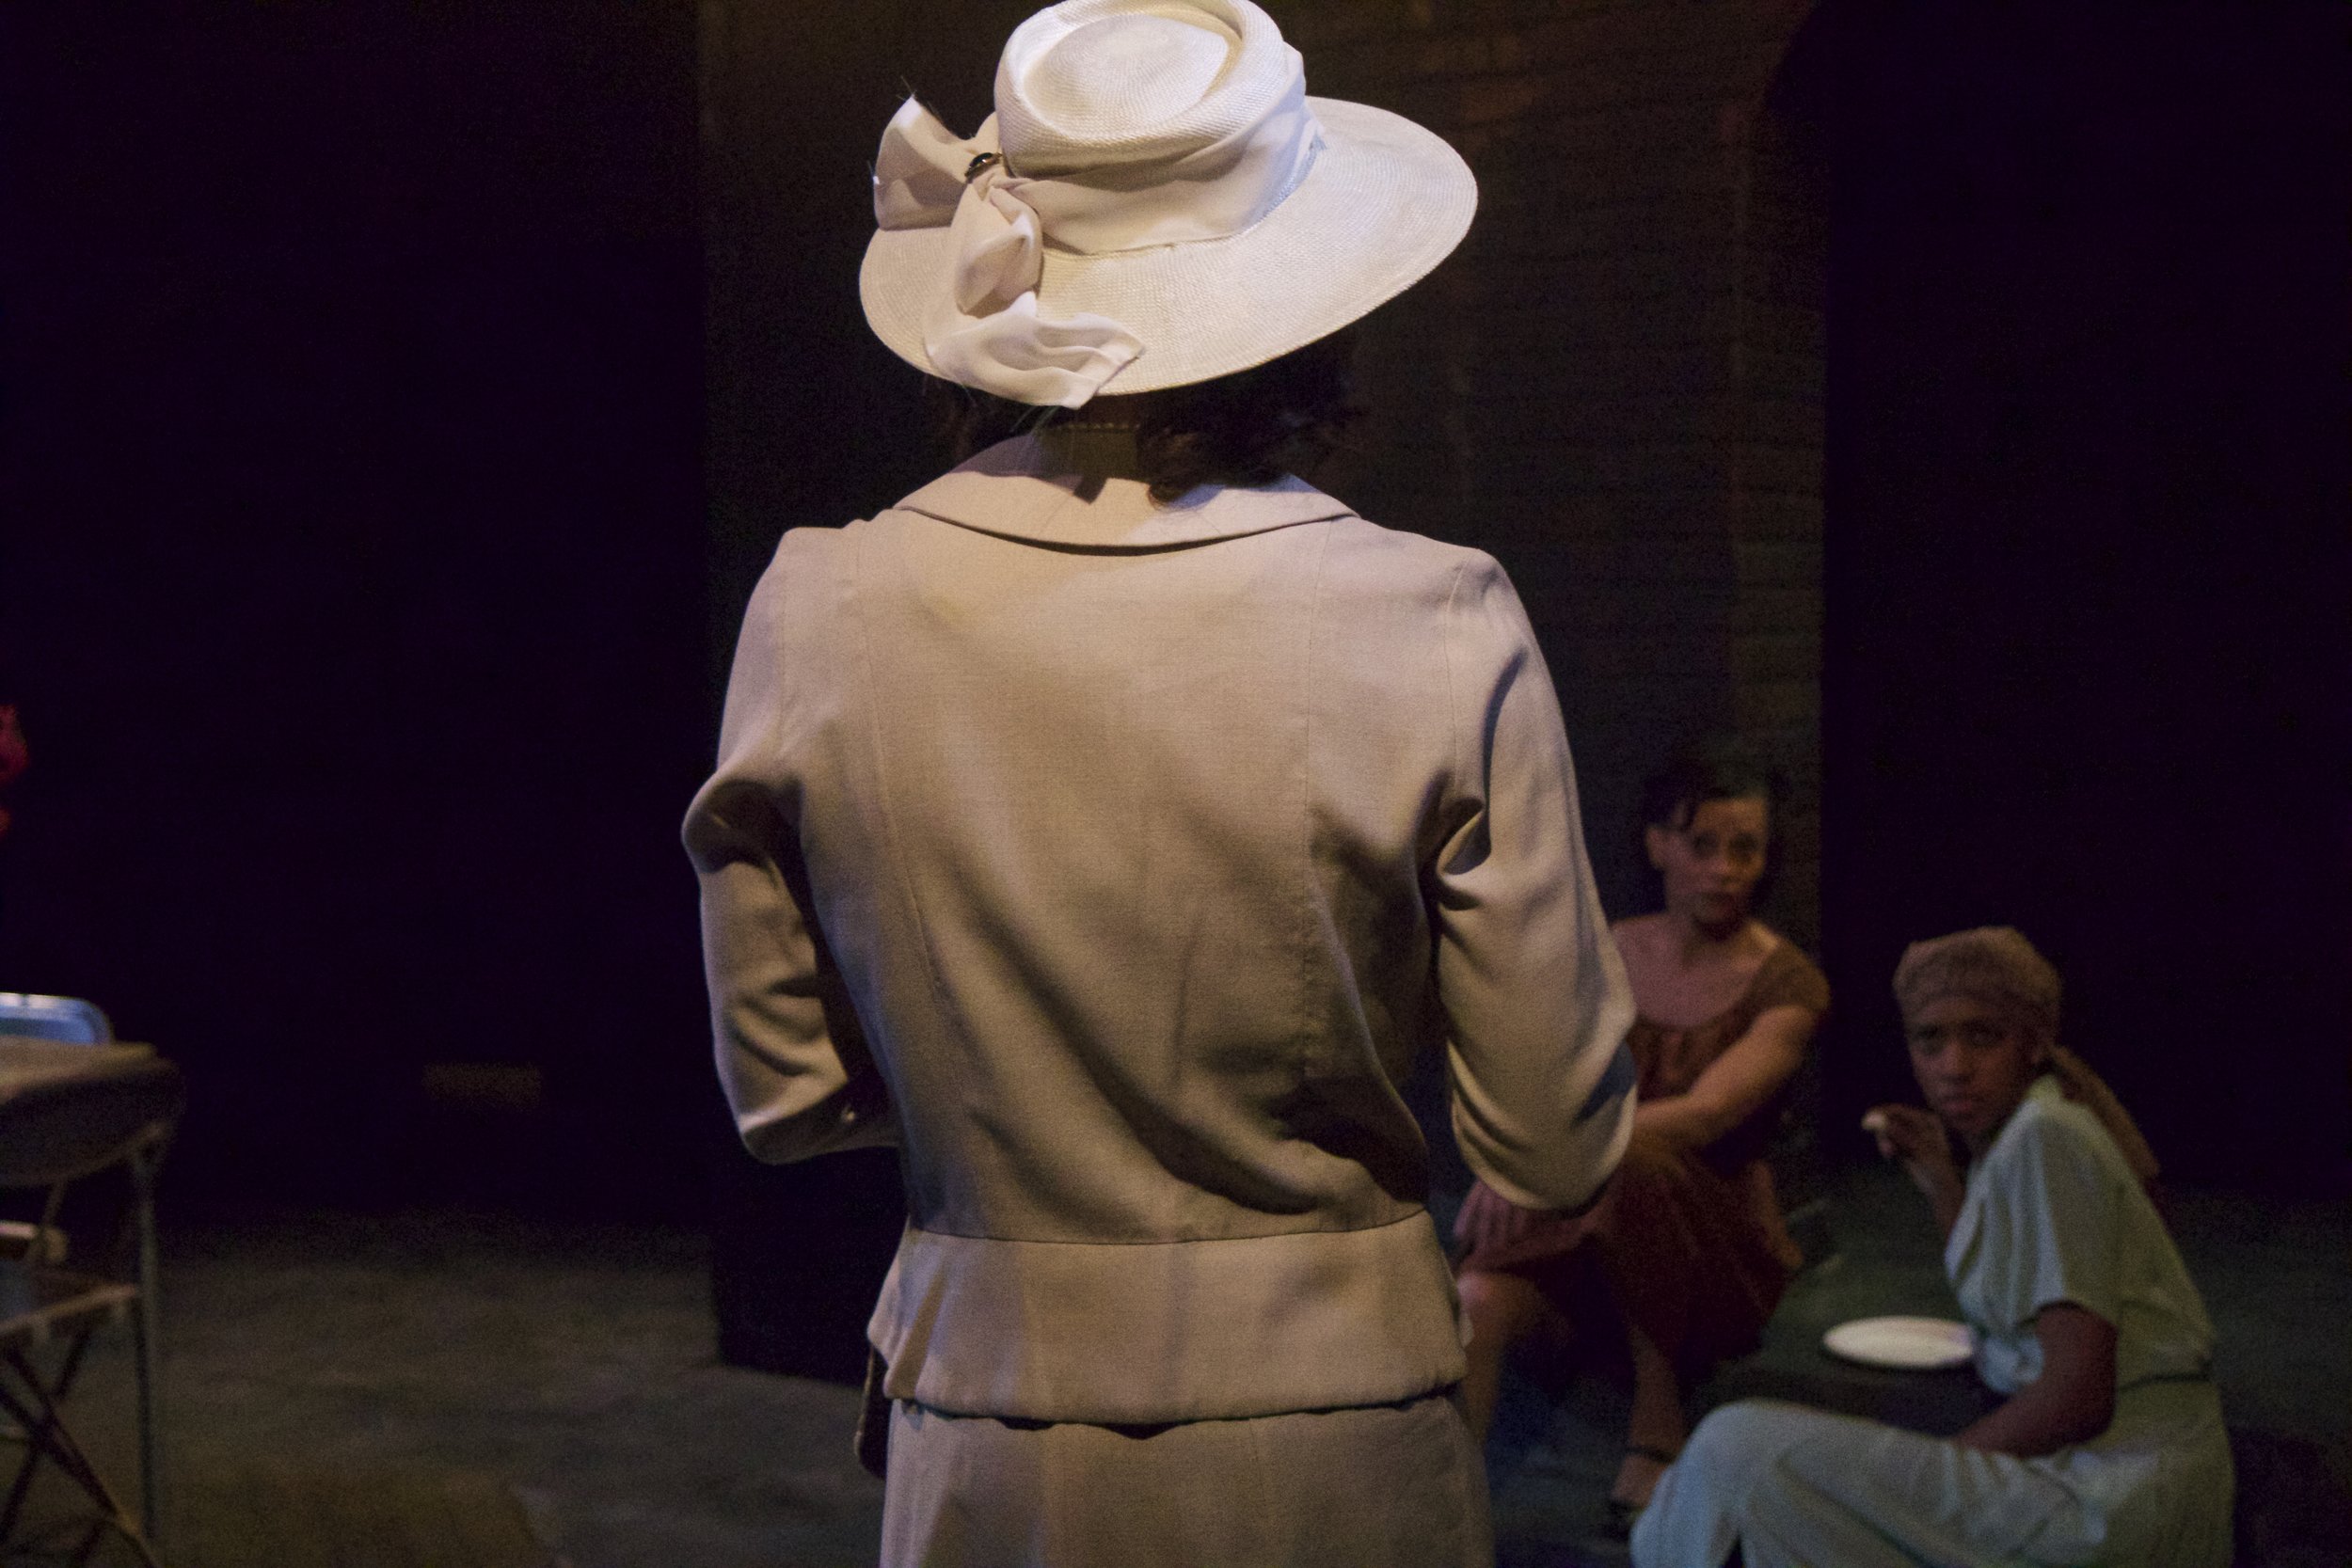 A Streetcar Named Desire - 2014 | Directed by Aaron Reese Boseman &amp; Chris Jackson